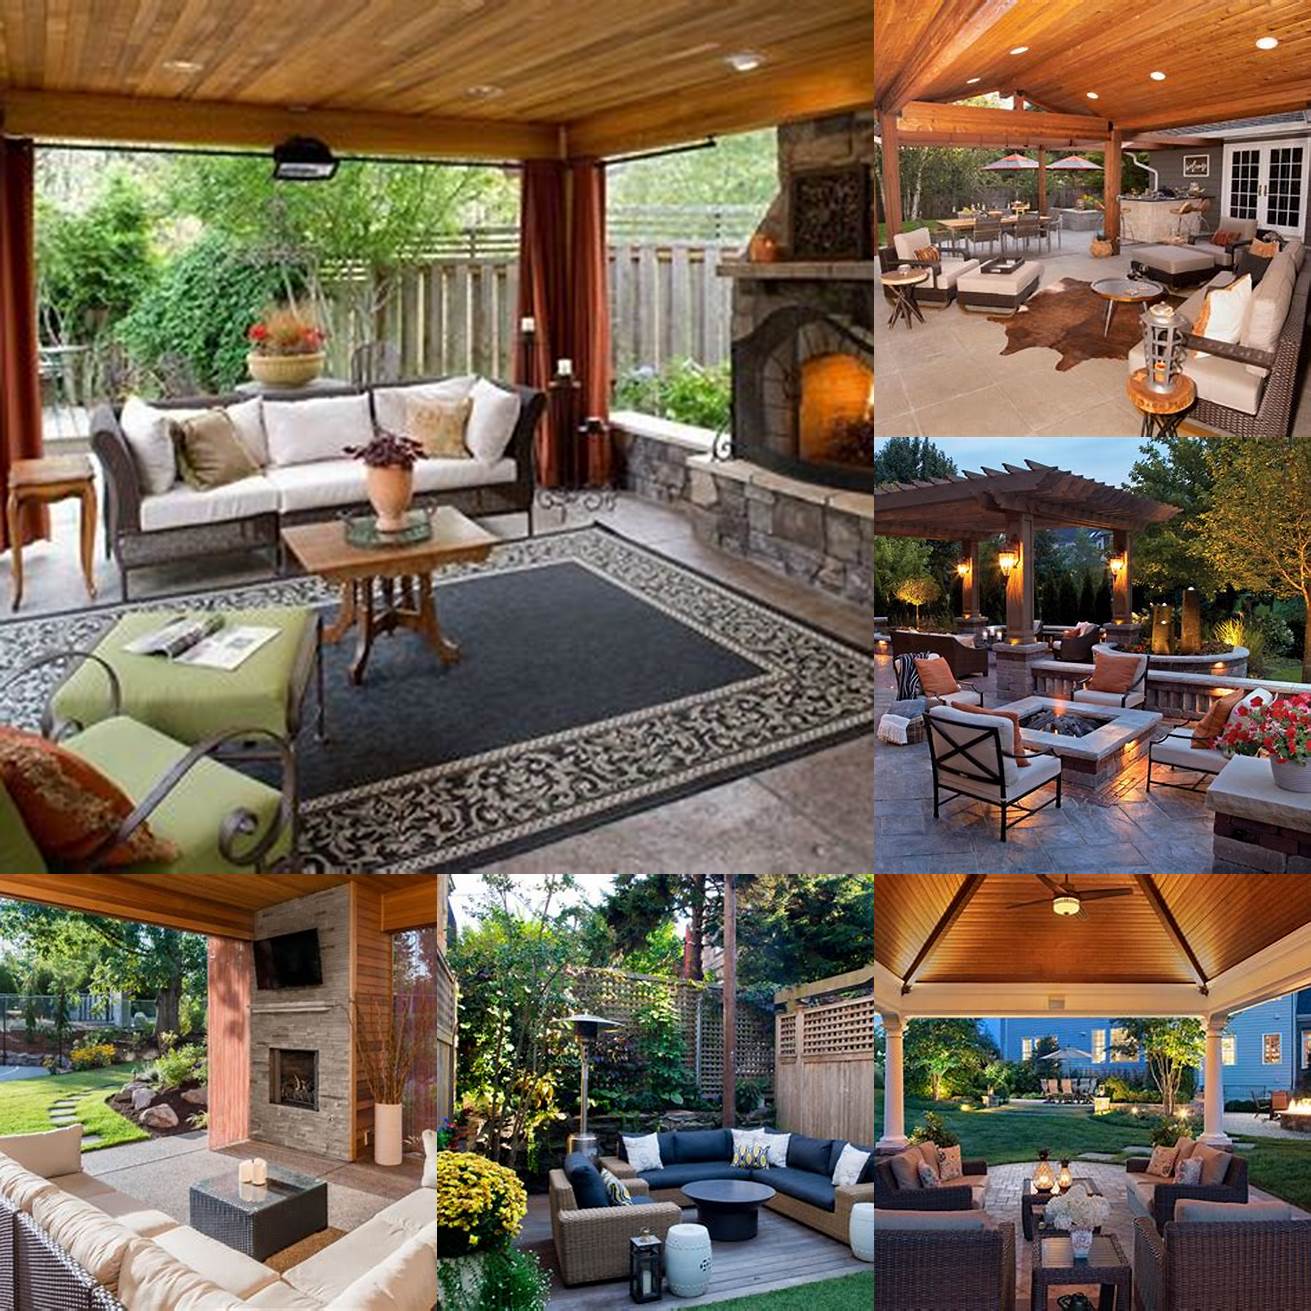 Enhance outdoor living spaces